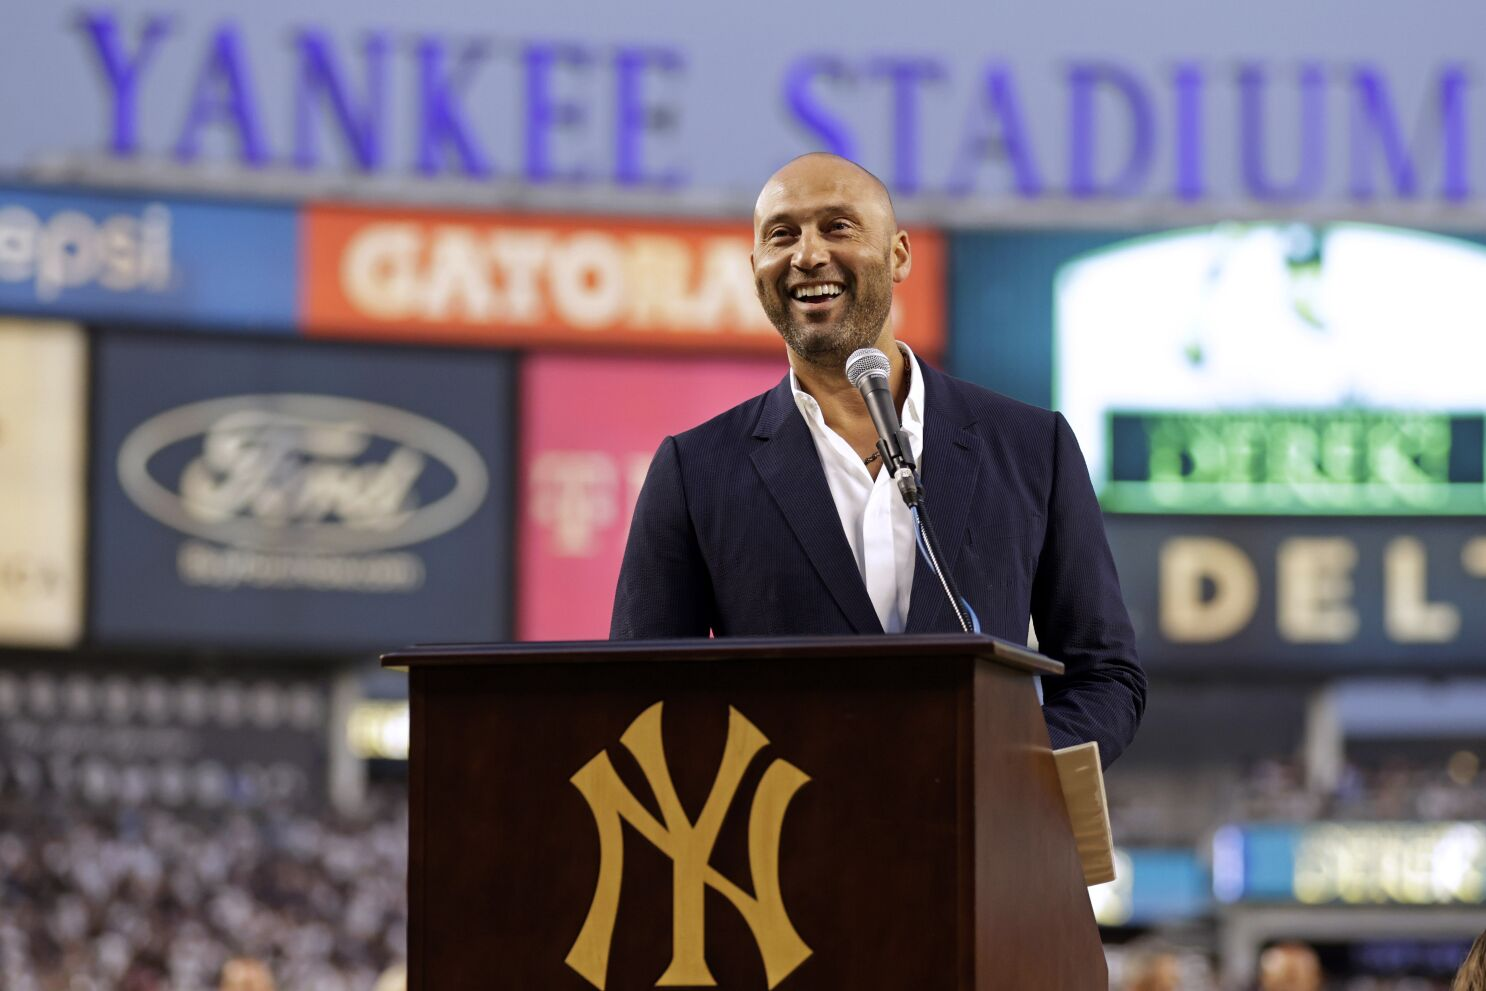 Why Derek Jeter could make even more money in retirement